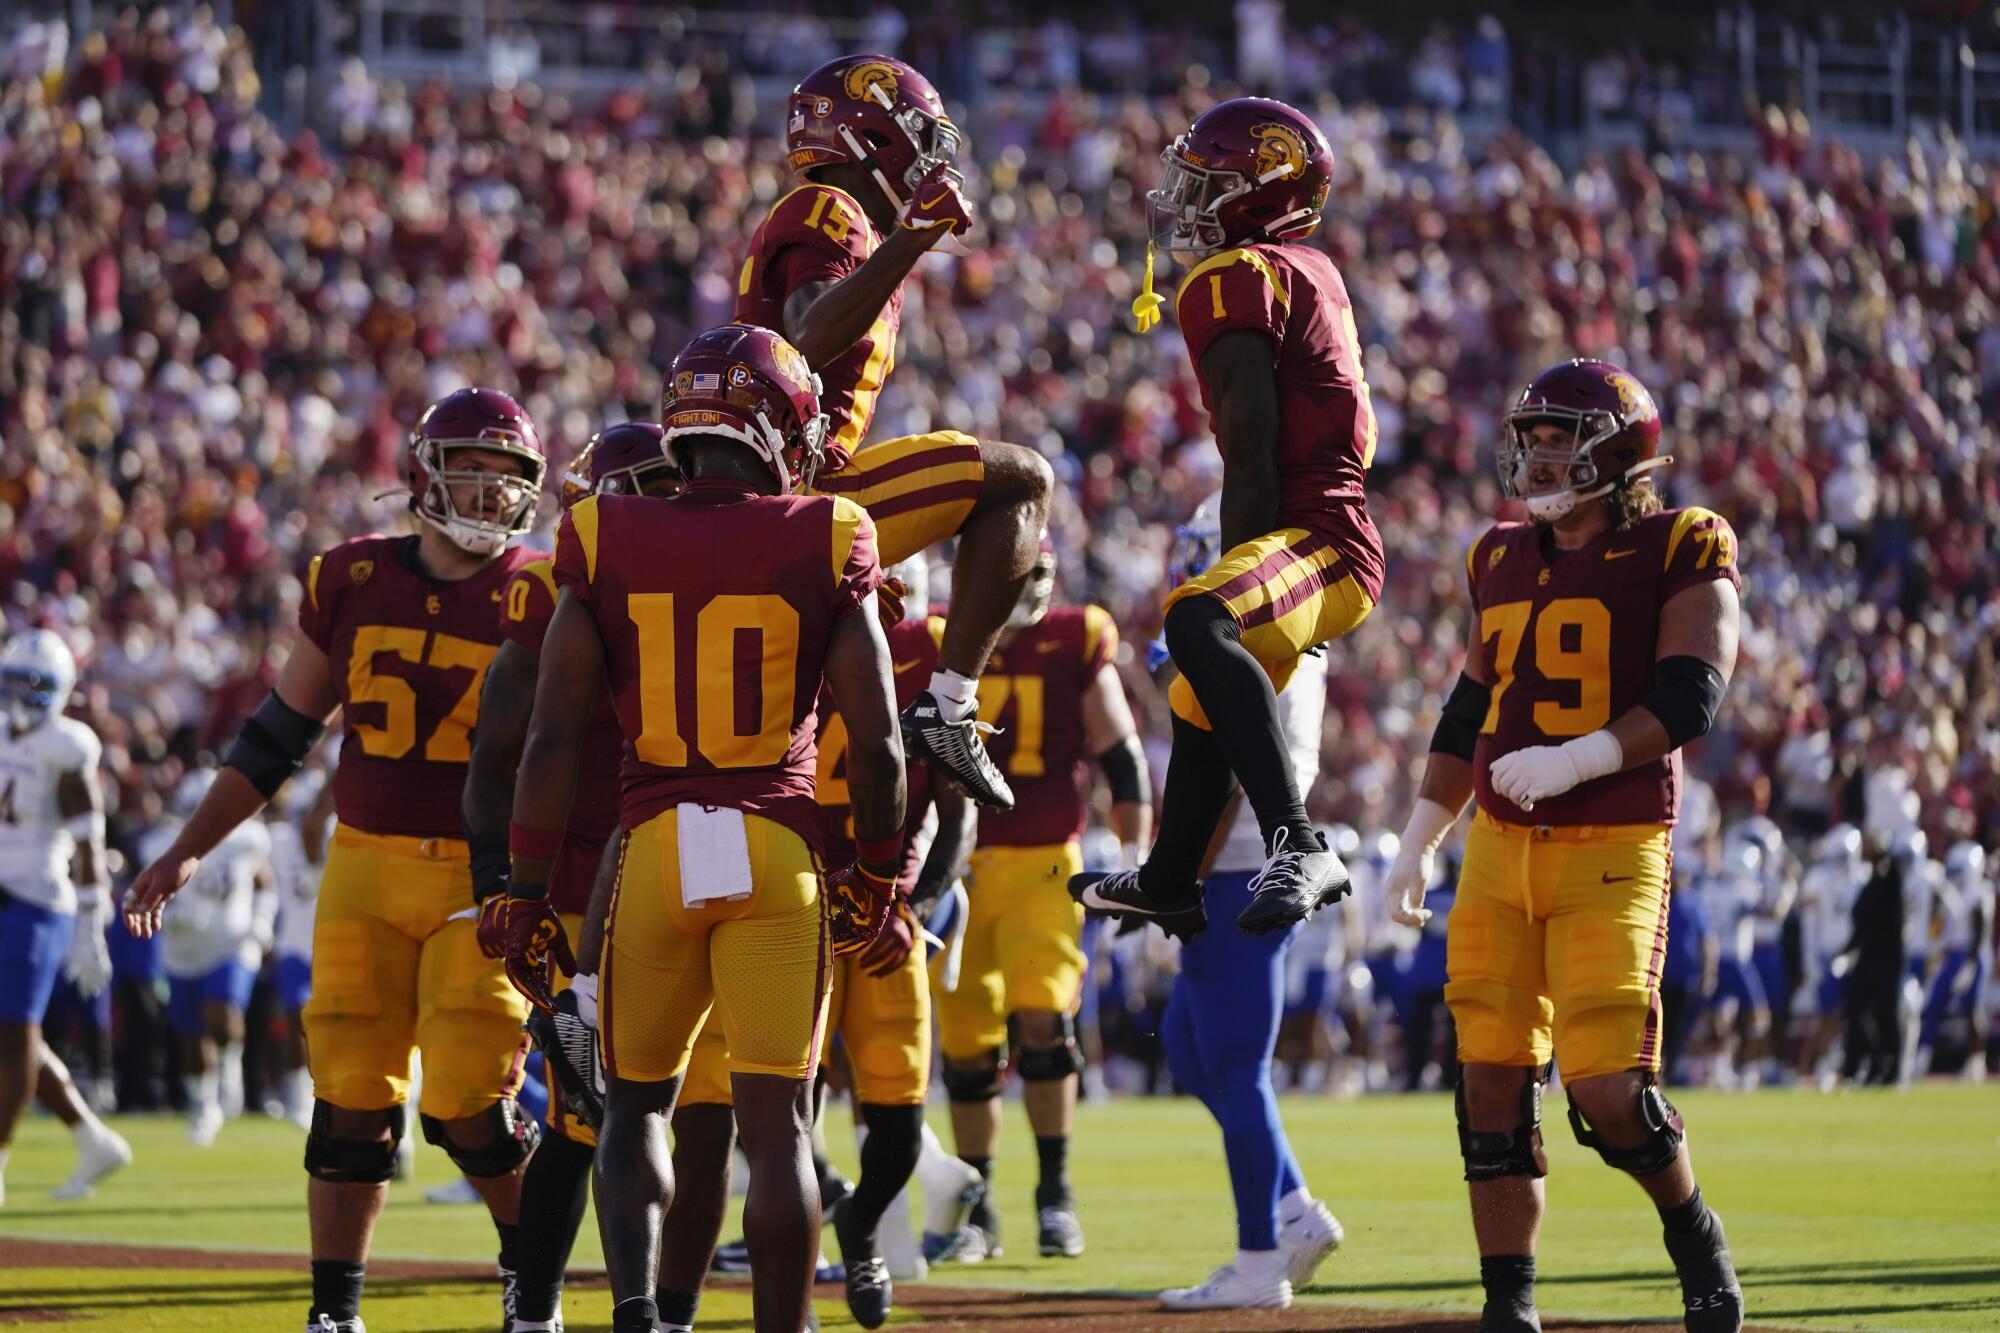 Receivers Dorian Singer and Zachariah Branch jump in the air while celebrating Singer's touchdown against San José State